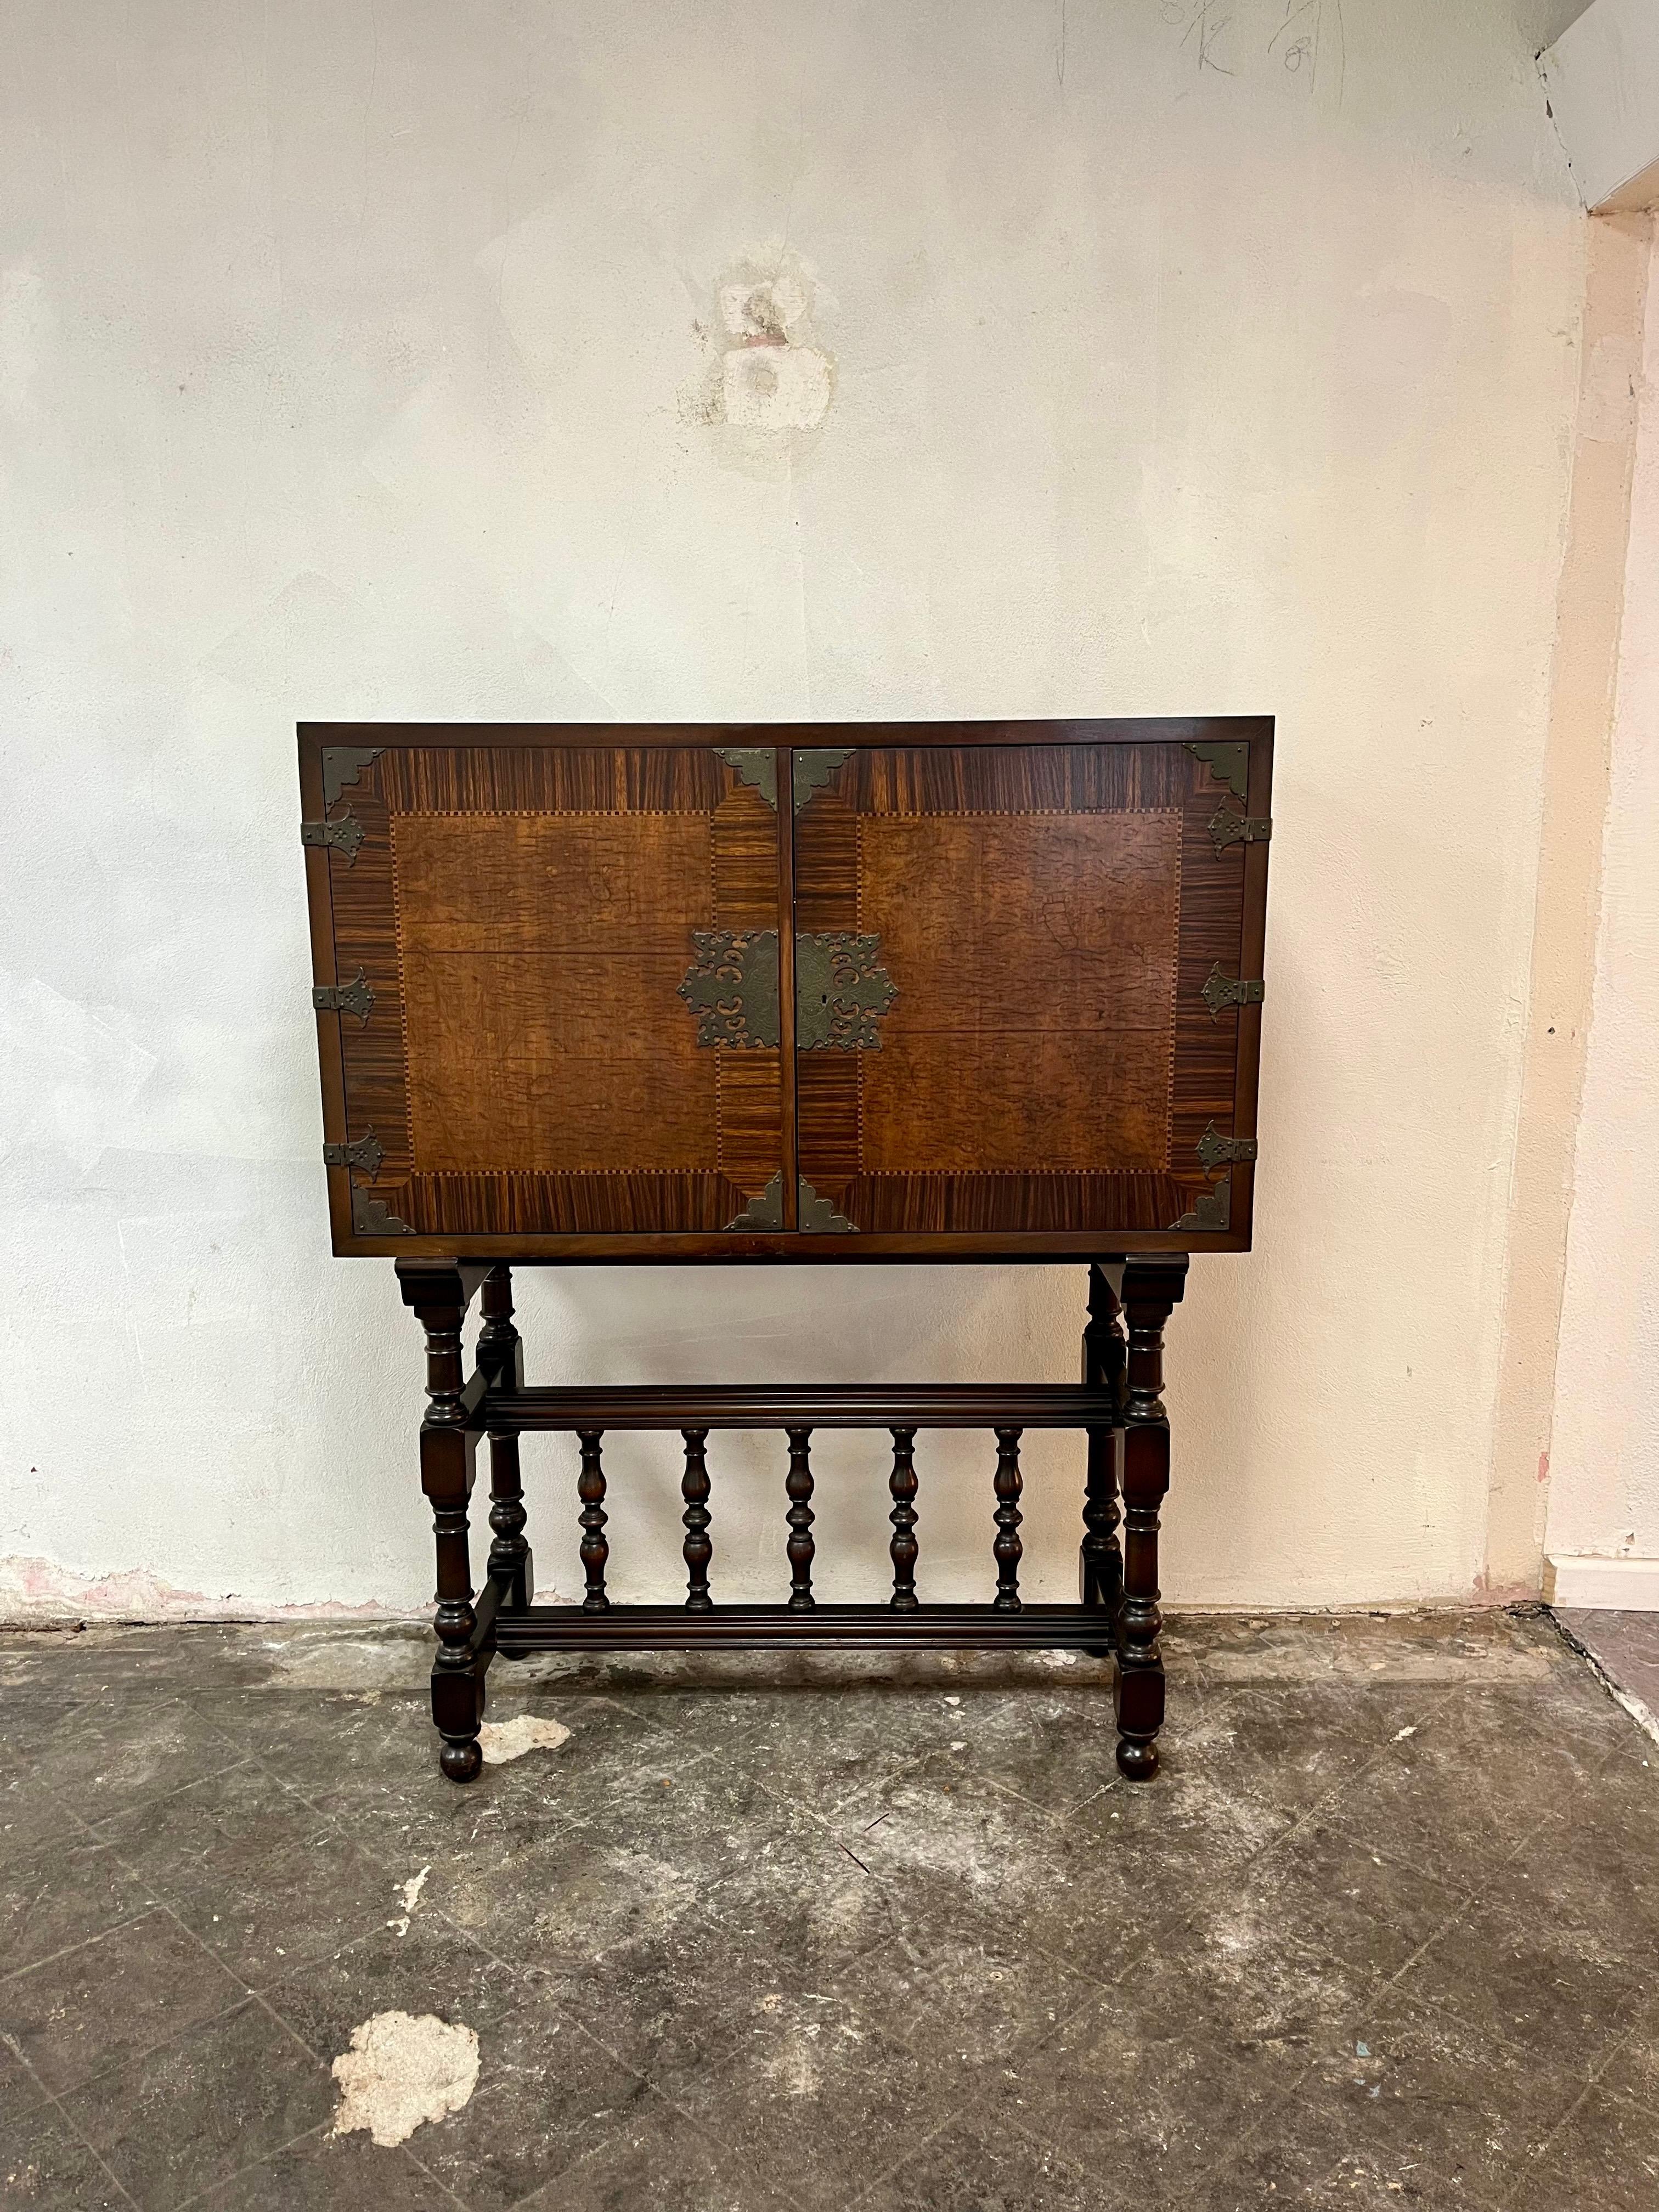 Wonderful Chinoiserie Cabinet on stand. Beautiful detail in the wood grain with different interations of walnut and classic chinoiserie metal work. Nice balance on turned legs with wide swinging doors house 2 shelves with plate grooves for ample